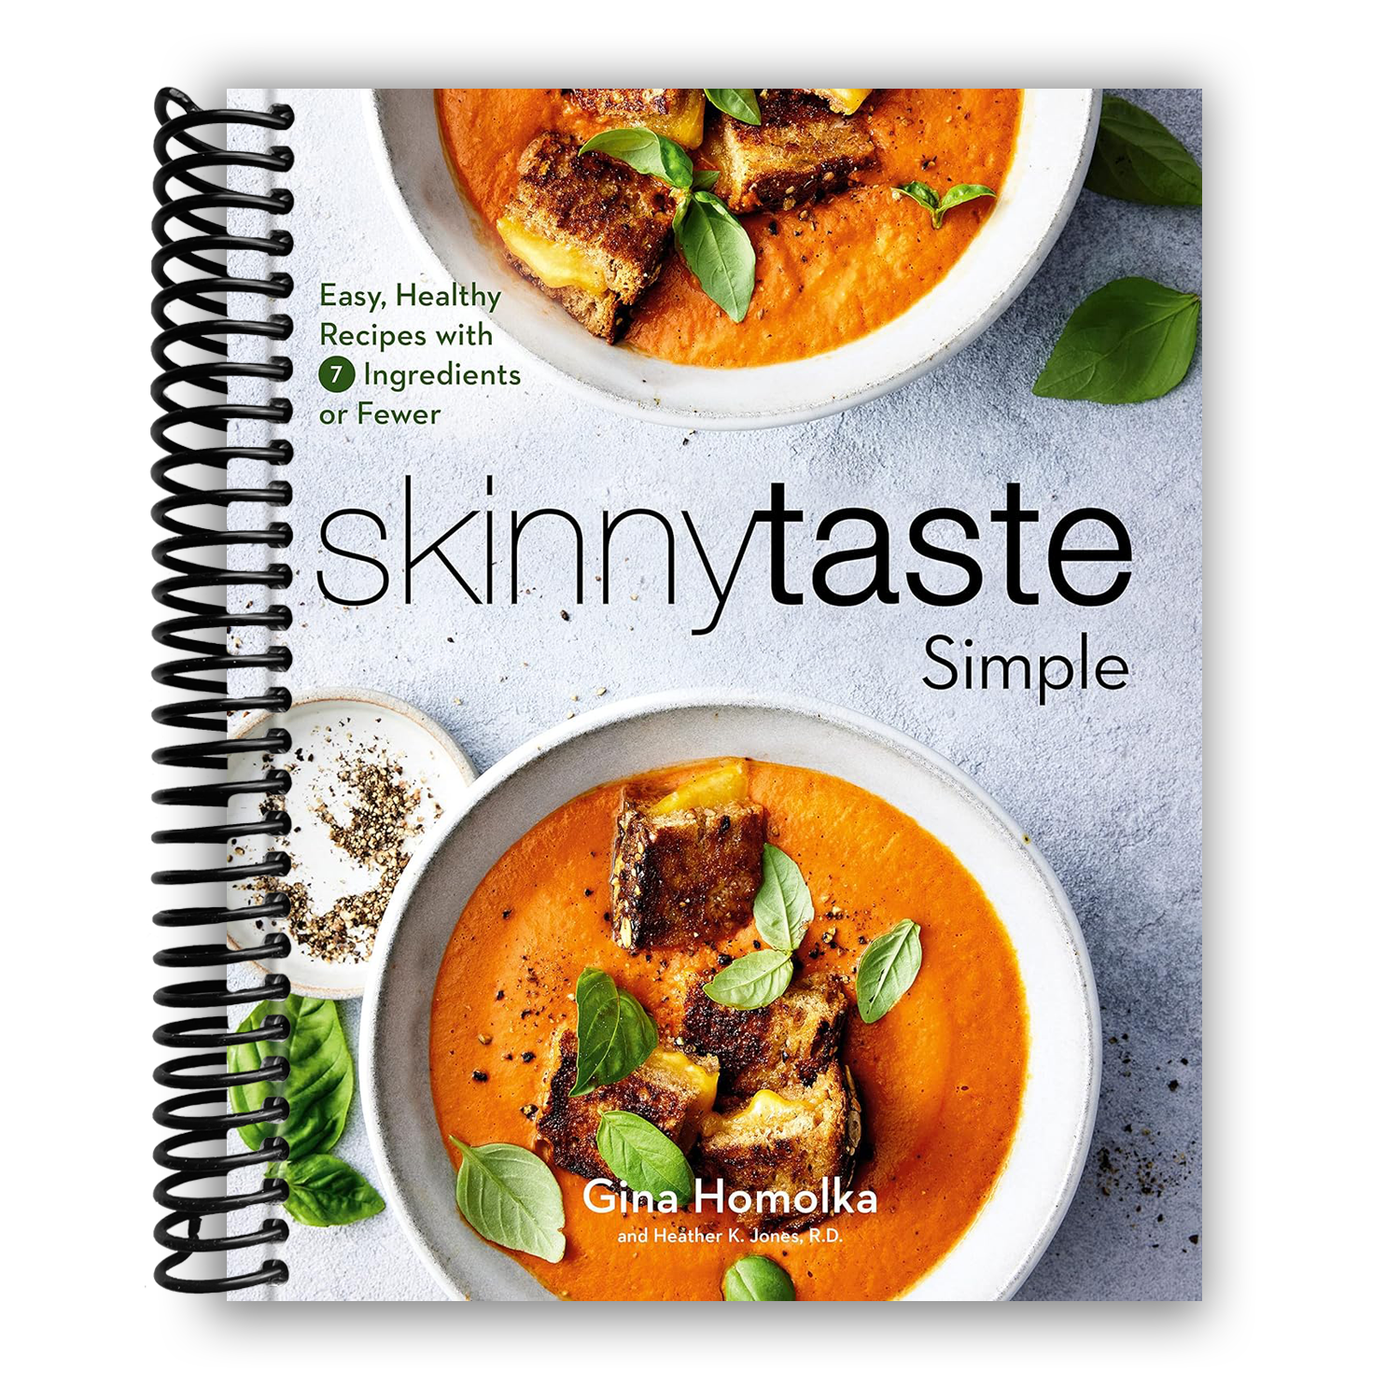 Skinnytaste Simple: Easy, Healthy Recipes with 7 Ingredients or Fewer: A Cookbook (Spiral Bound)